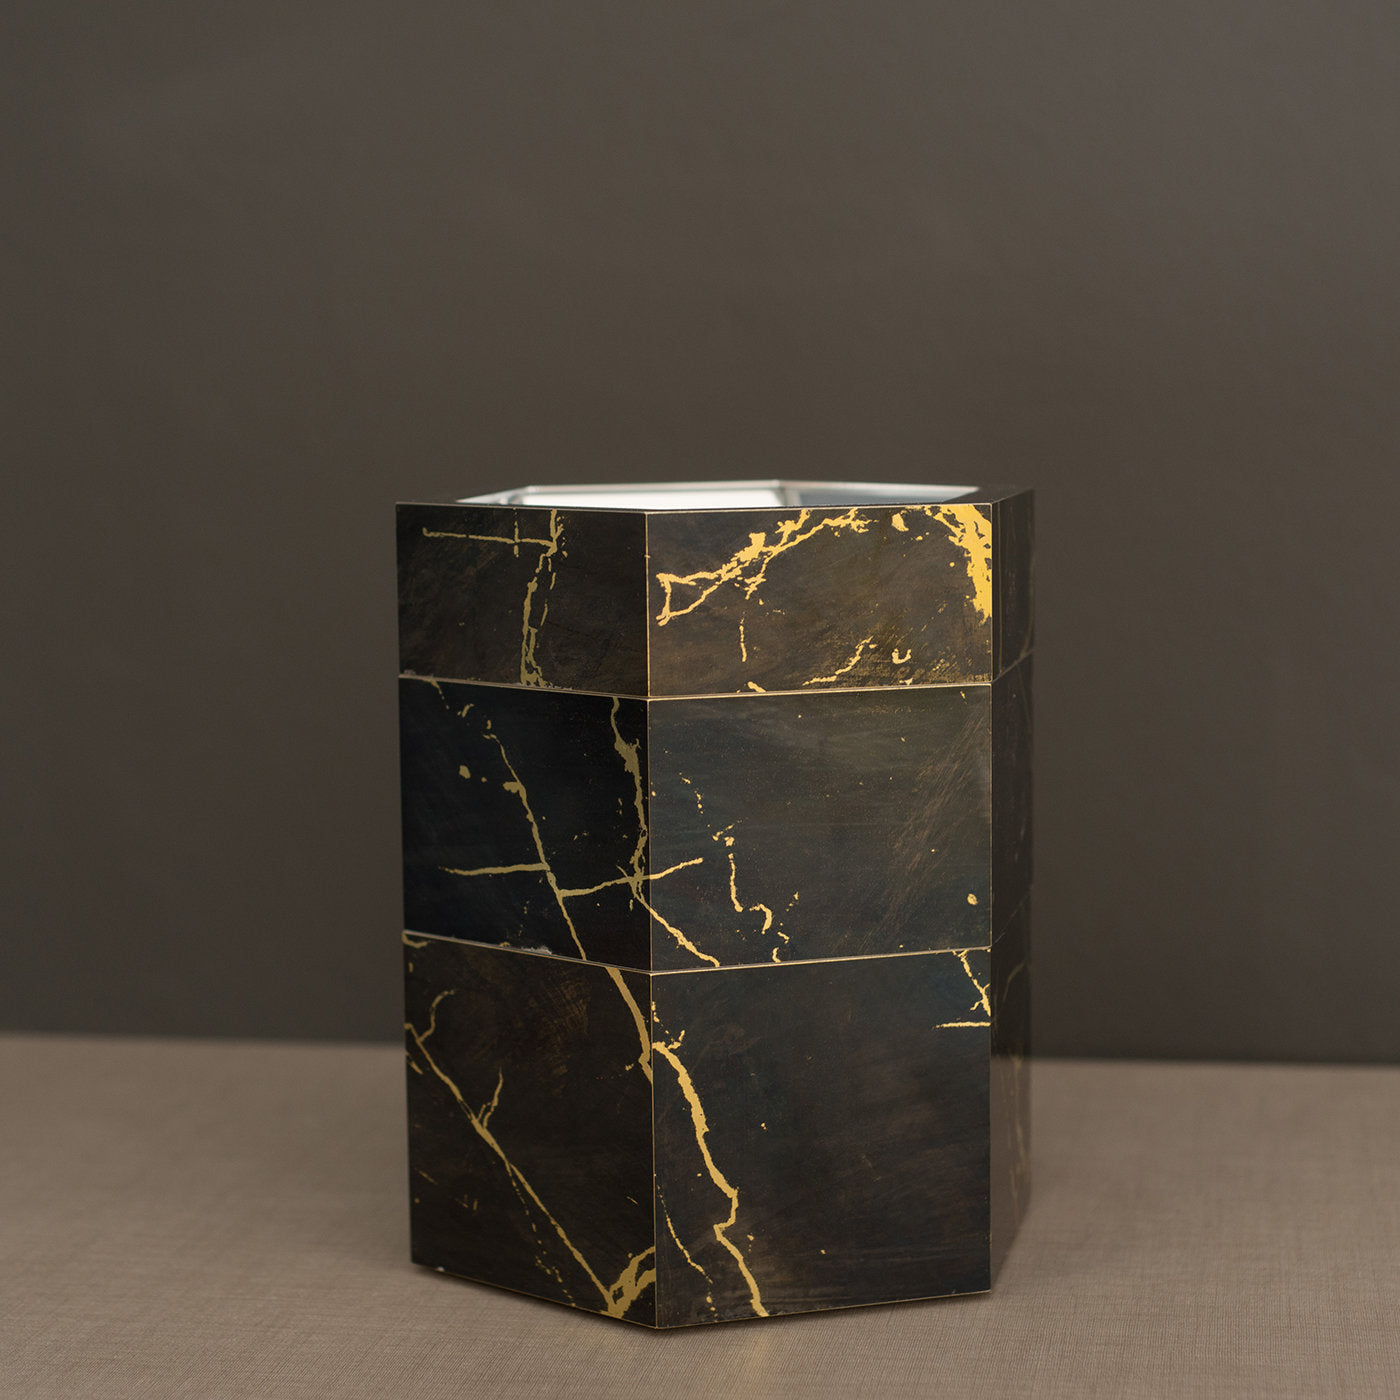 Esa Black Marbled Stackable Catchall Box - Alternative view 3